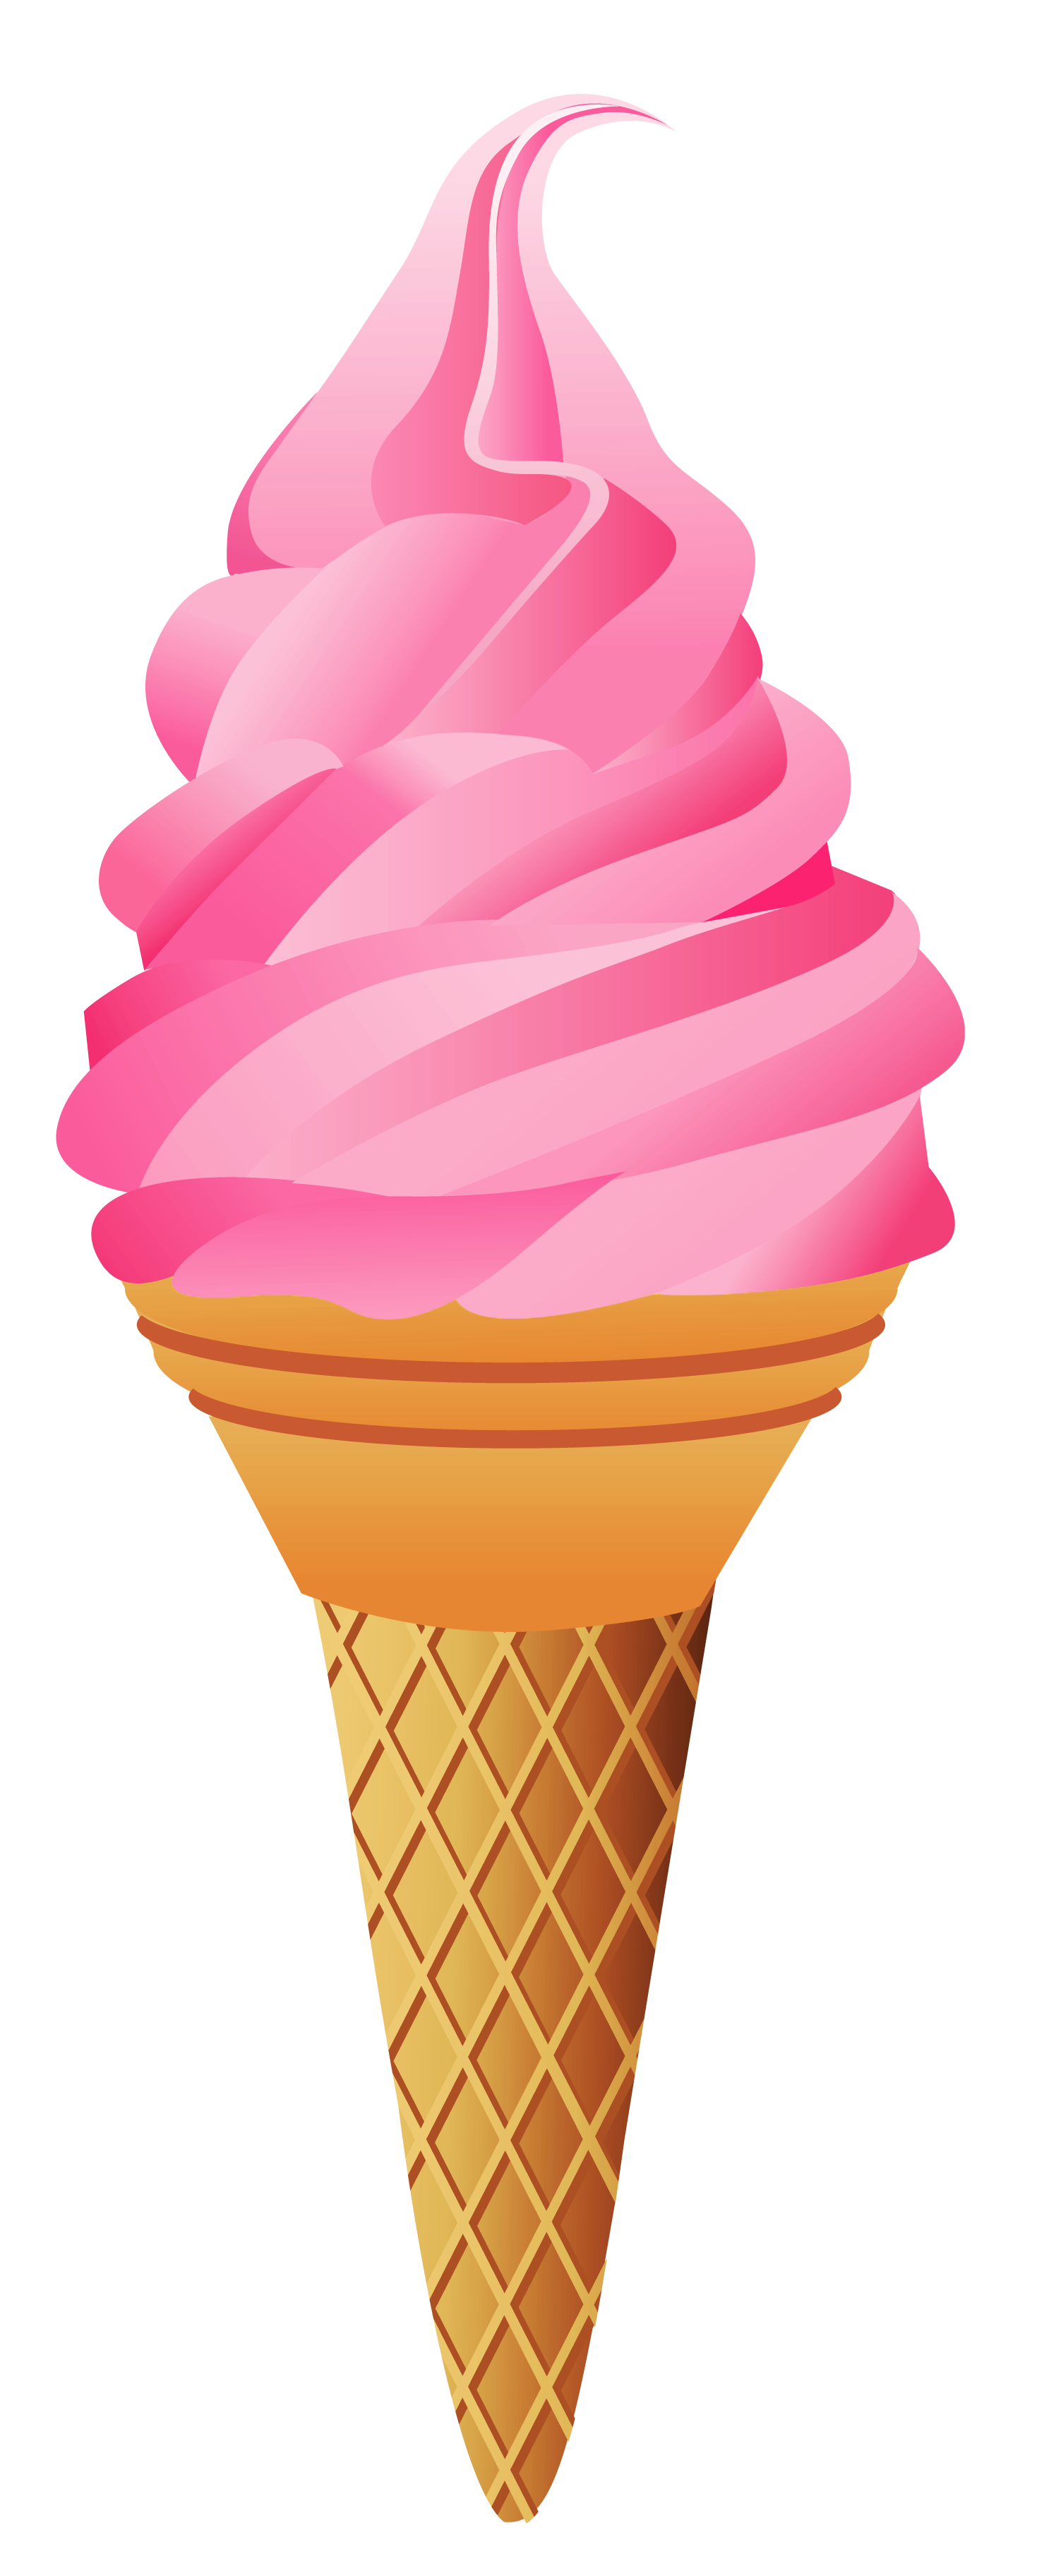 Ice Cream Cone And Others Art Inspiration Clipart